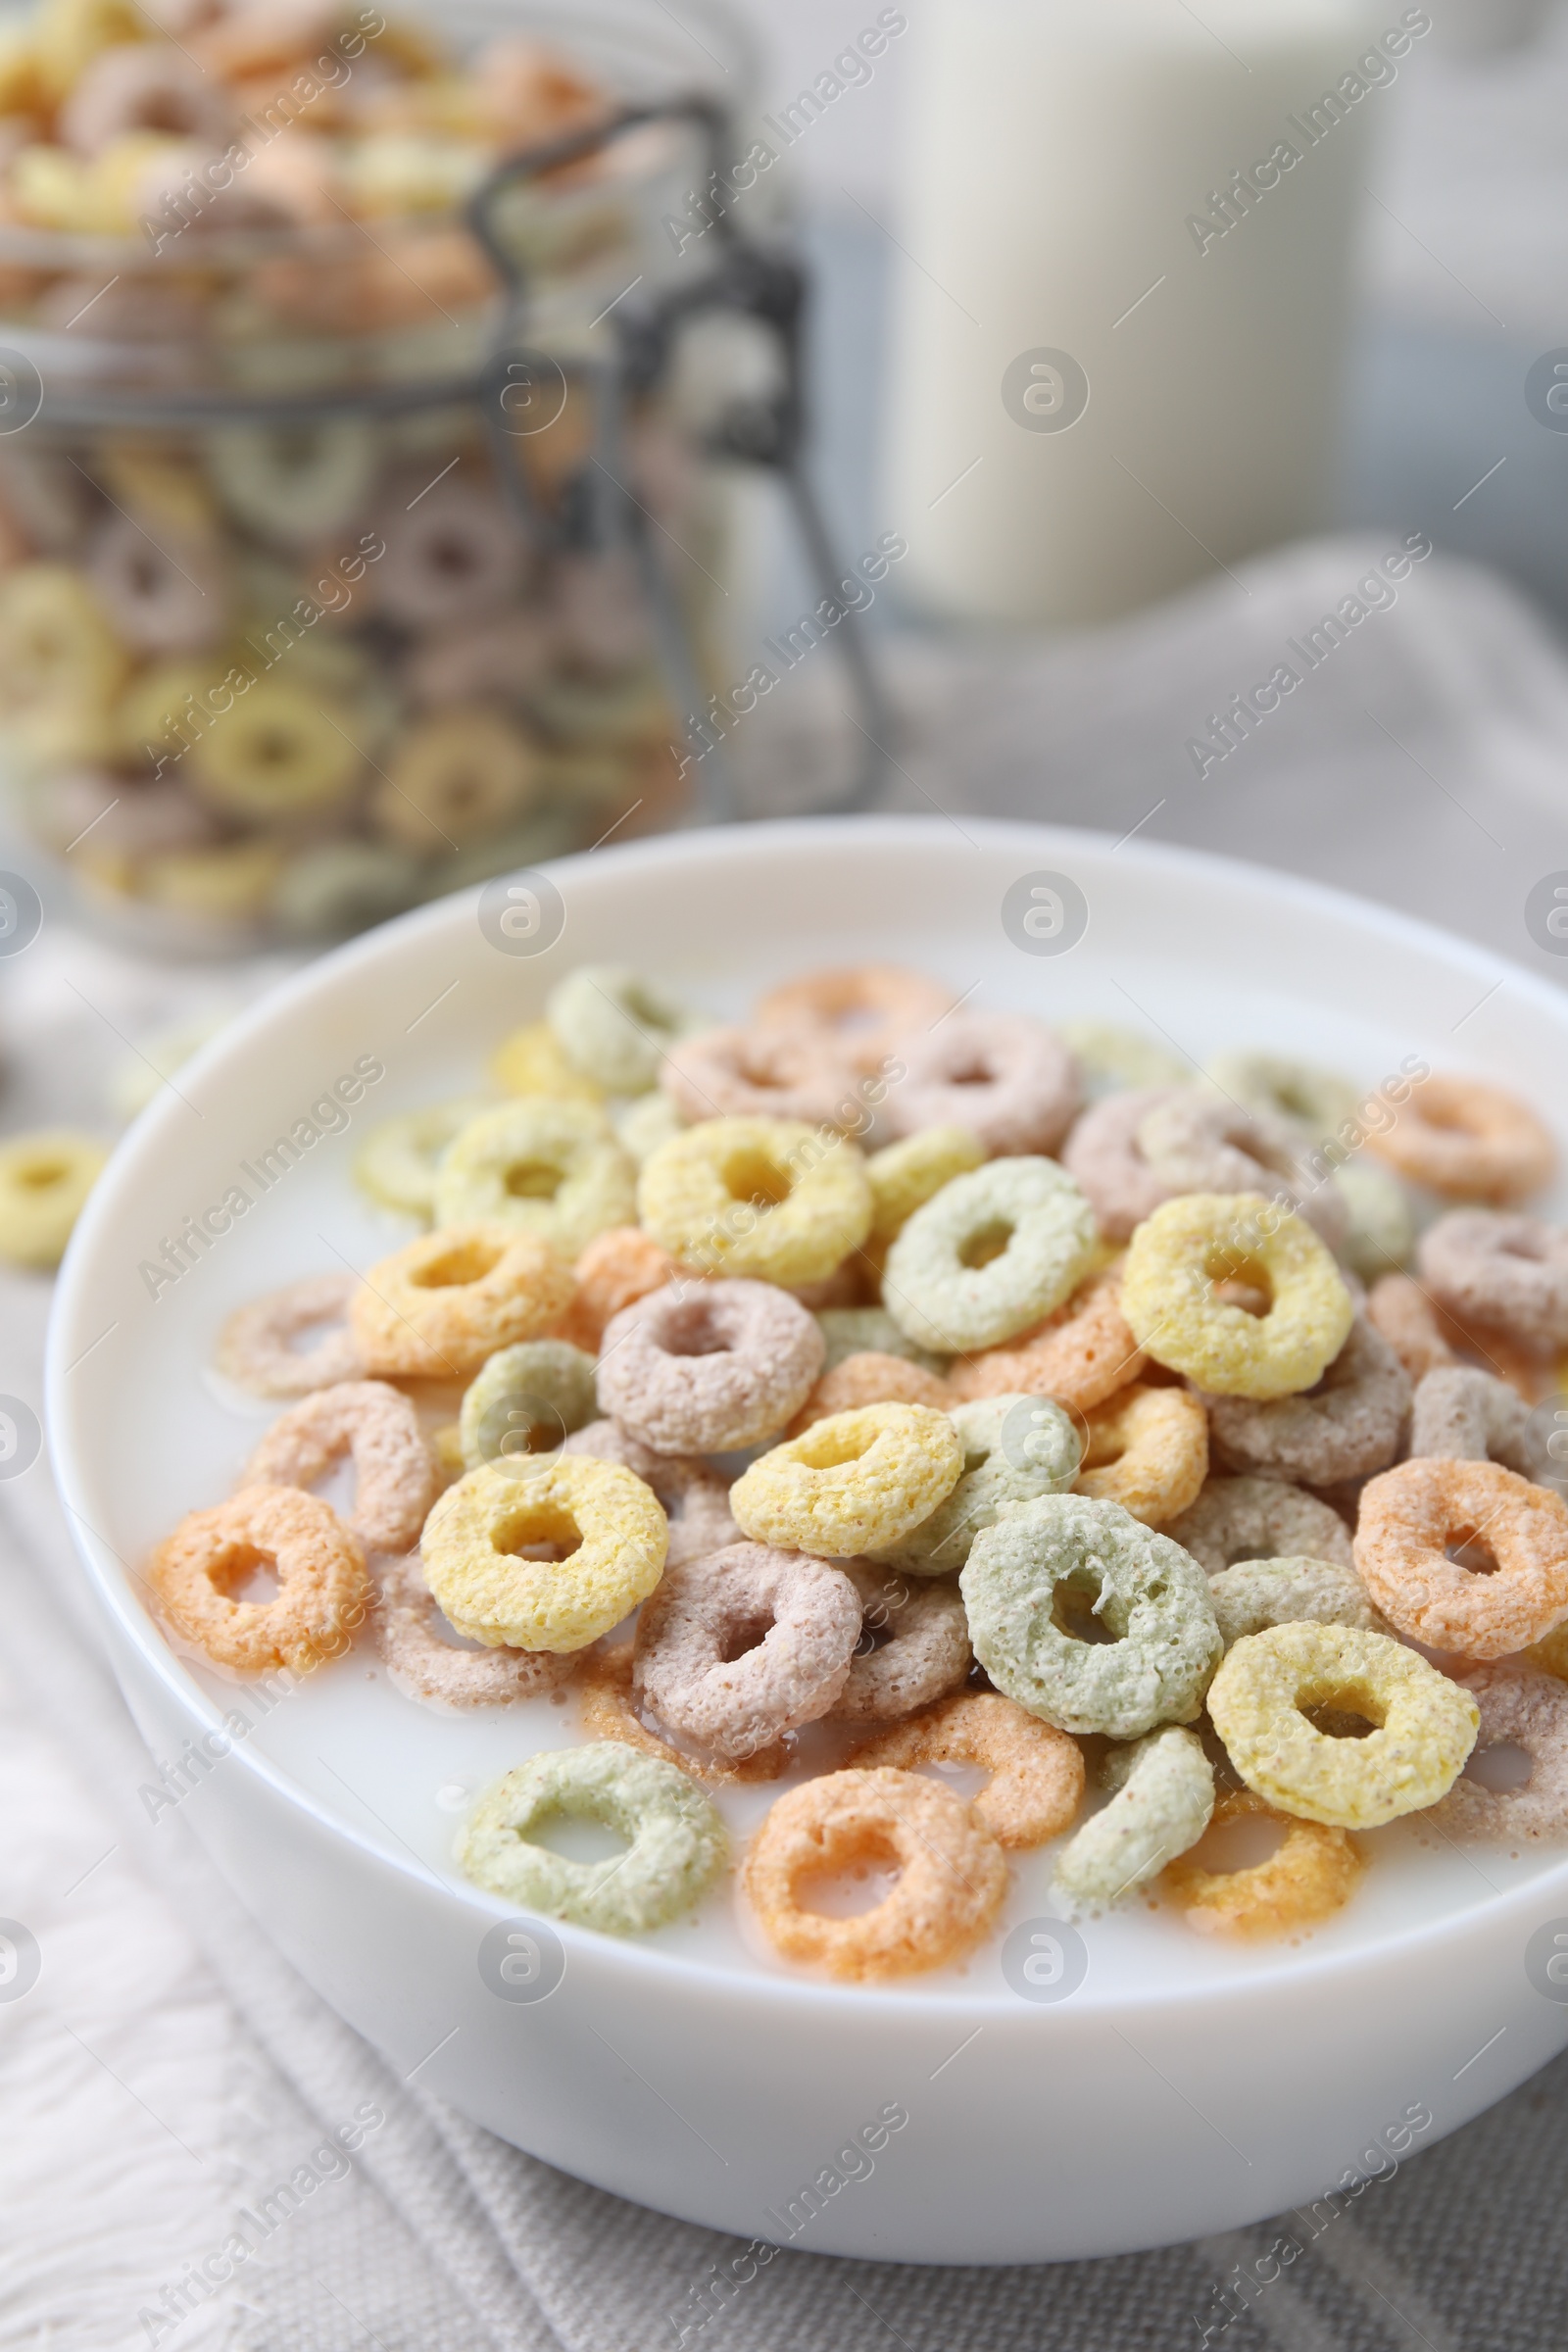 Photo of Tasty colorful cereal rings and milk in bowl on table, closeup